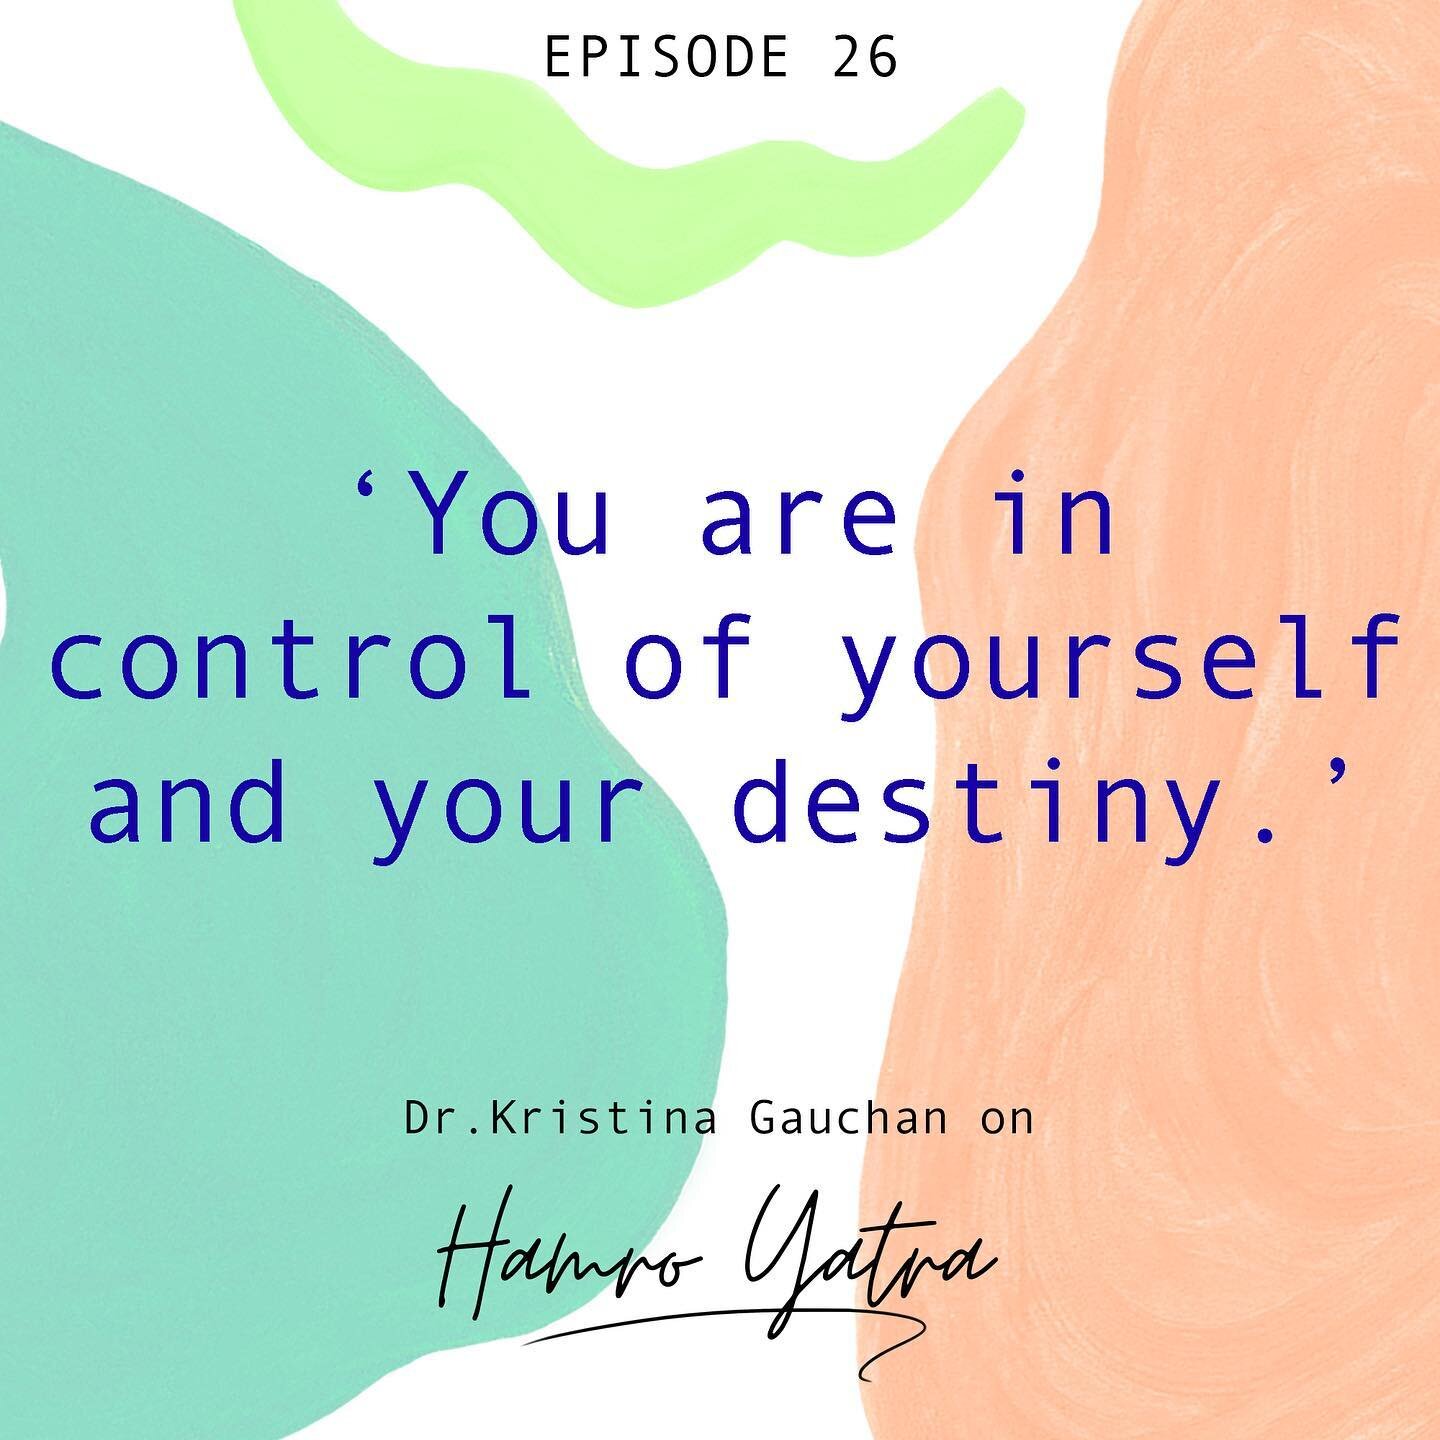 A lil monday motivation to curb those monday blues 🌞 have you listened to our new episode with @kristina_gau yet? Download &amp; listen now on spotify, apple podcast and other major platforms! 

We love hearing from you, let us know what you think! 